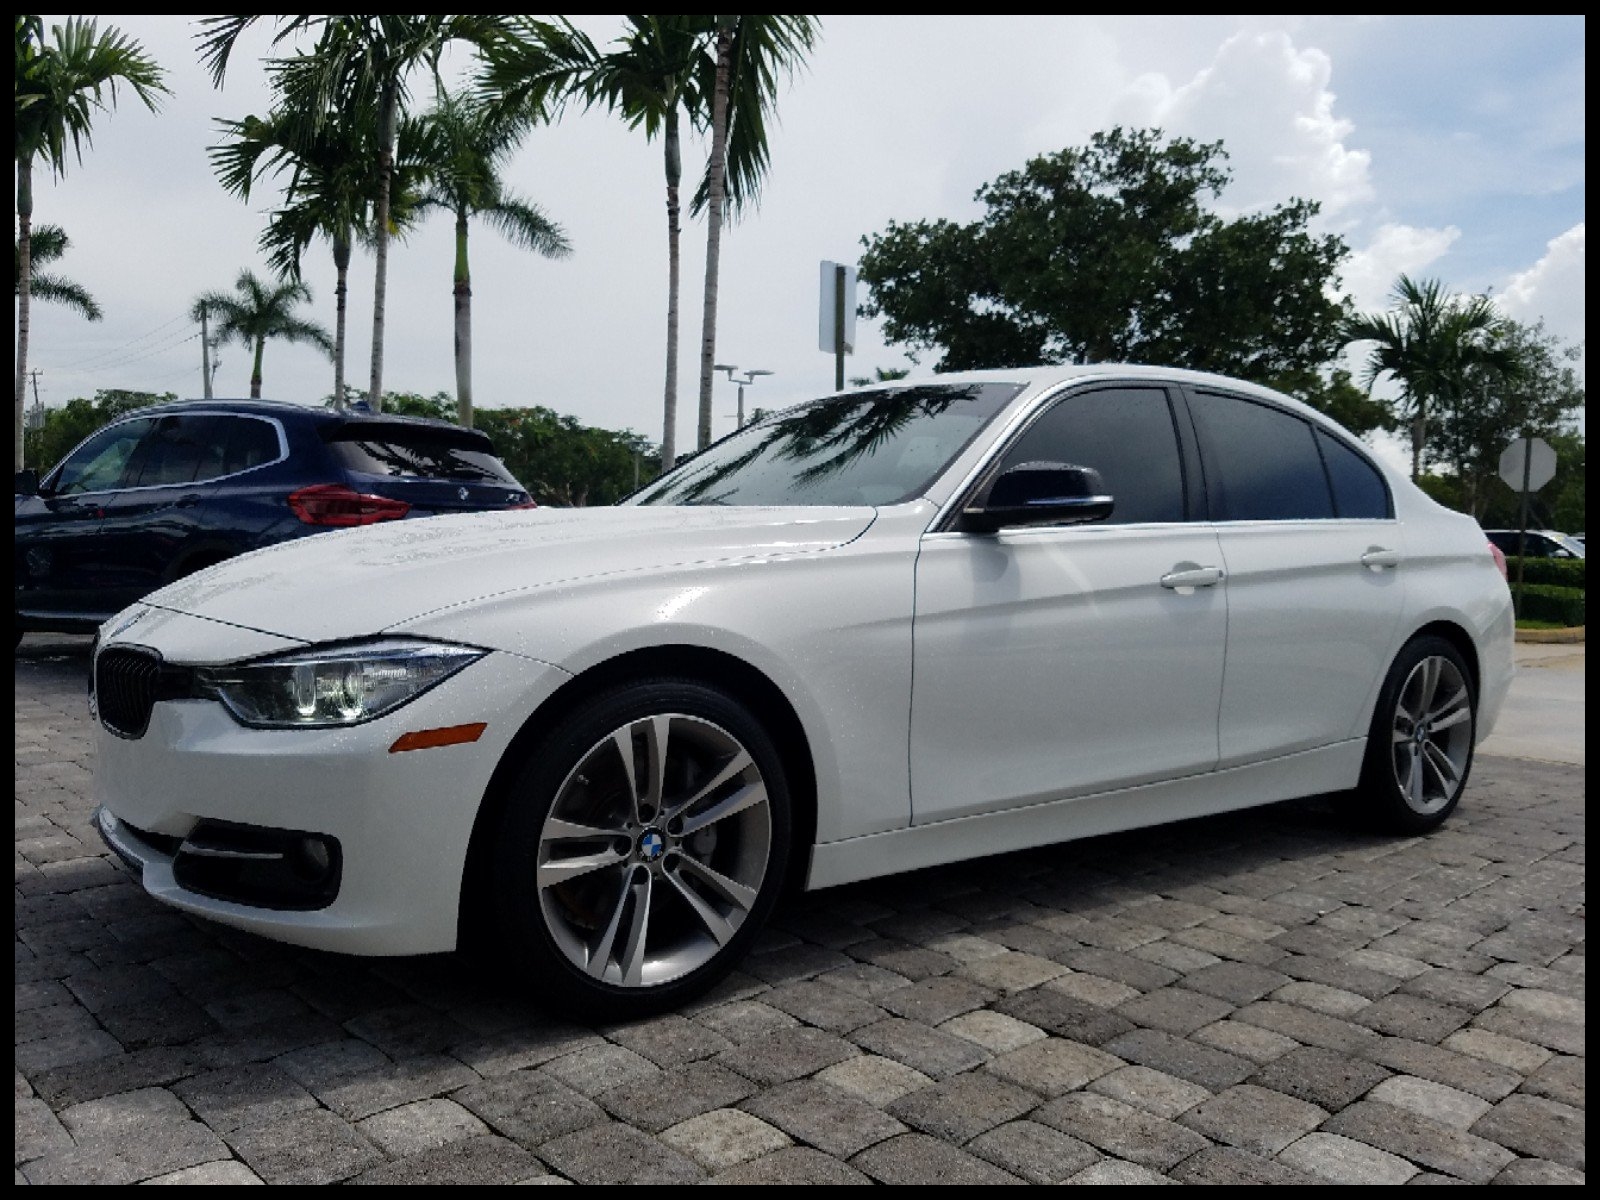 Certified 2015 BMW 335i w South Africa For Sale in Pembroke Pines FL Serving Miami